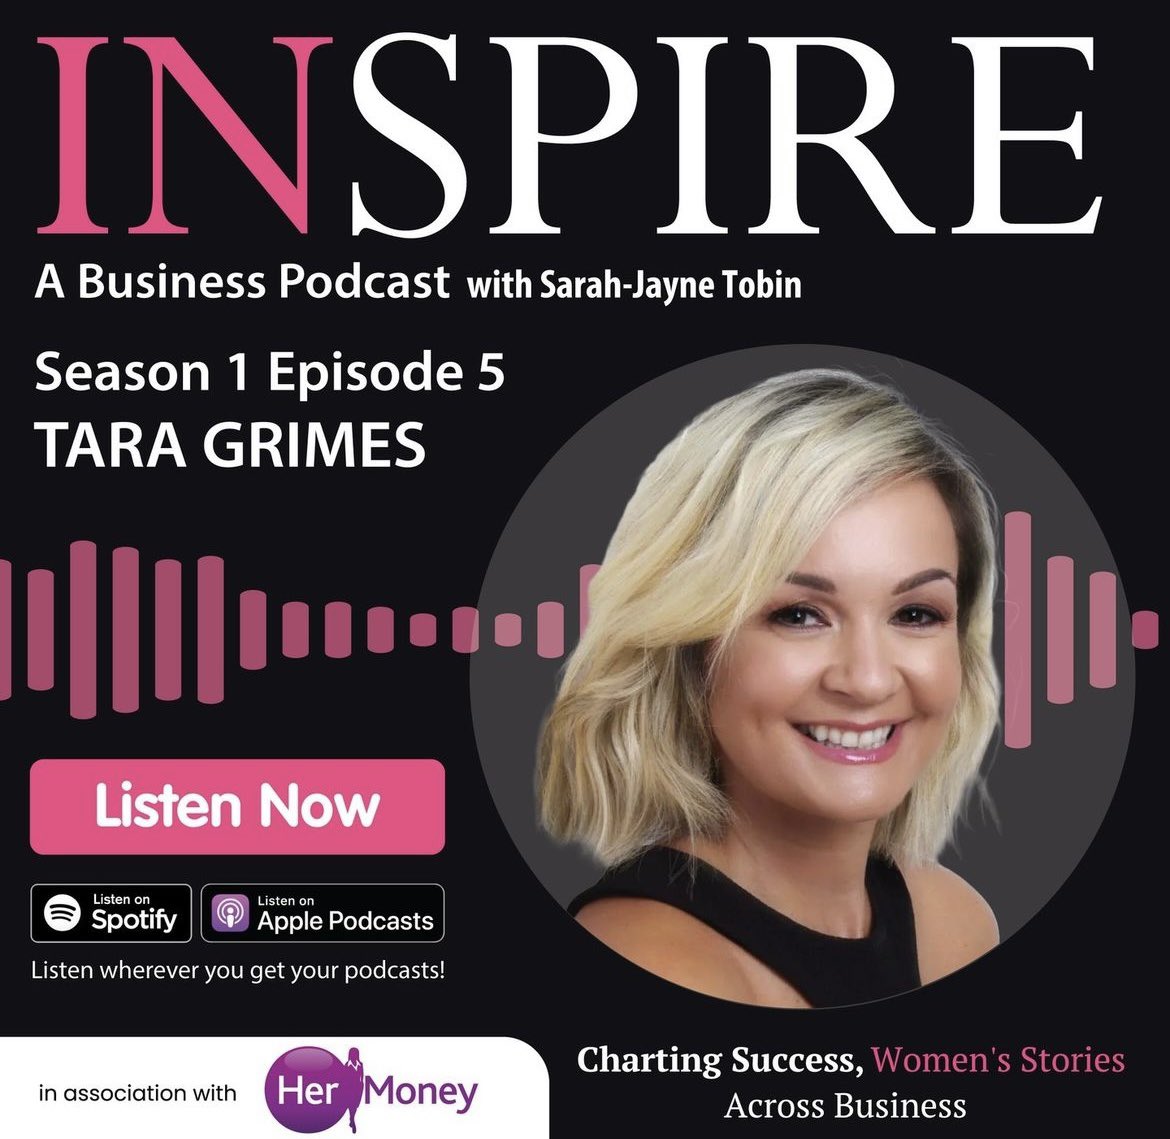 This week’s INSPIRE is with the fab Tara Grimes one of Ireland’s top weight loss coaches specialising in menopausal fitness. INSPIRE, in association with Her Money, is out Thurs! @HerMoneyCWM #hermoney #womeninfinance #financialfreedom #financialempowerment #wealthmanagement